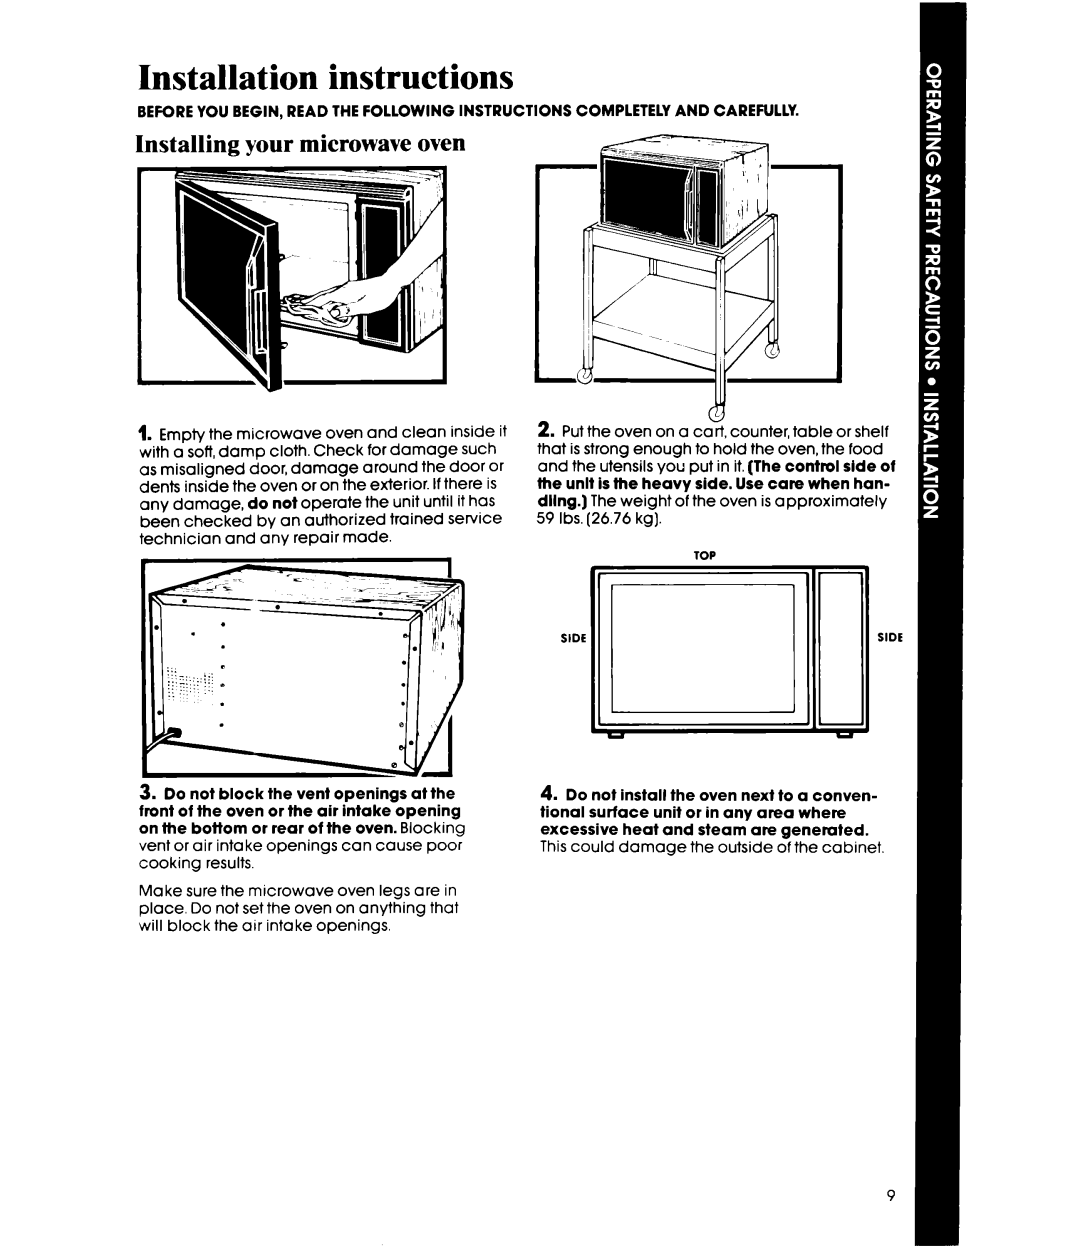 Whirlpool MW8100XR manual Installation instructions, Installing your microwave oven 